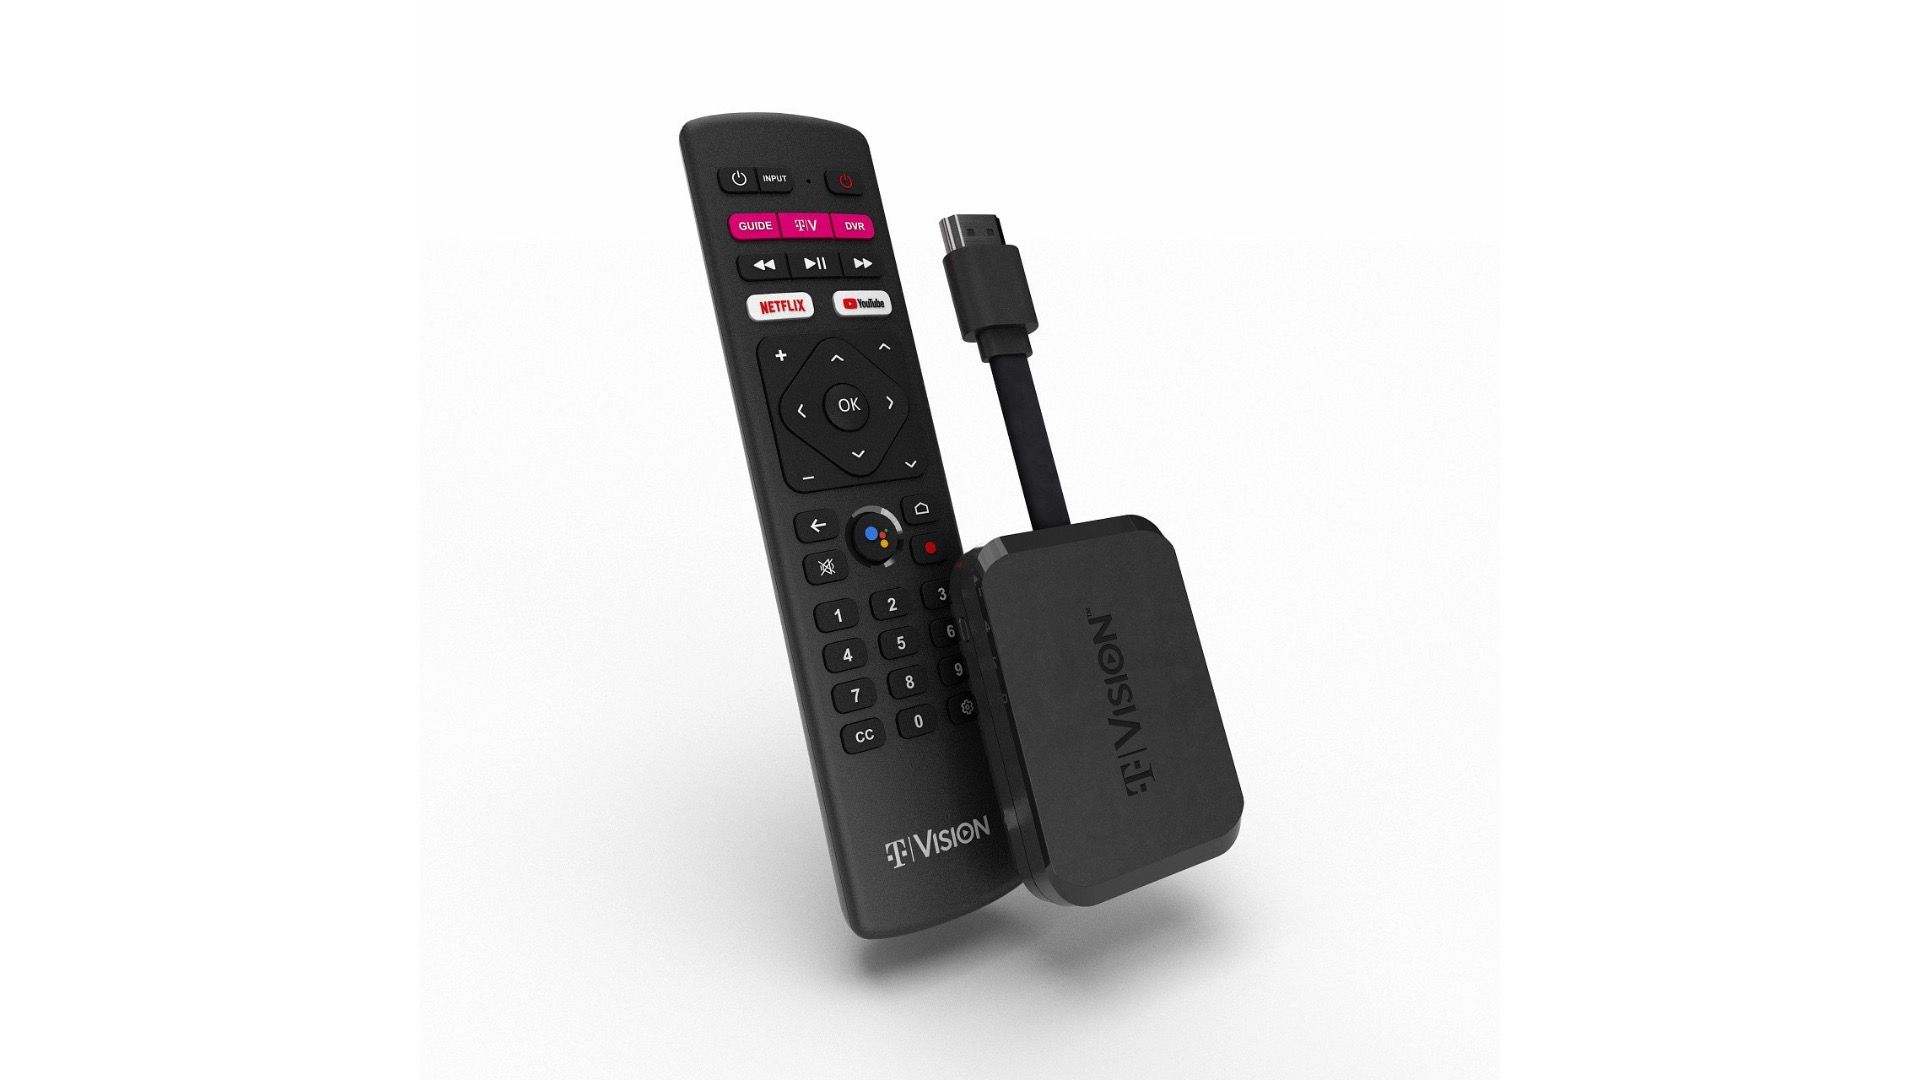 TVision HDMI dongle and remote